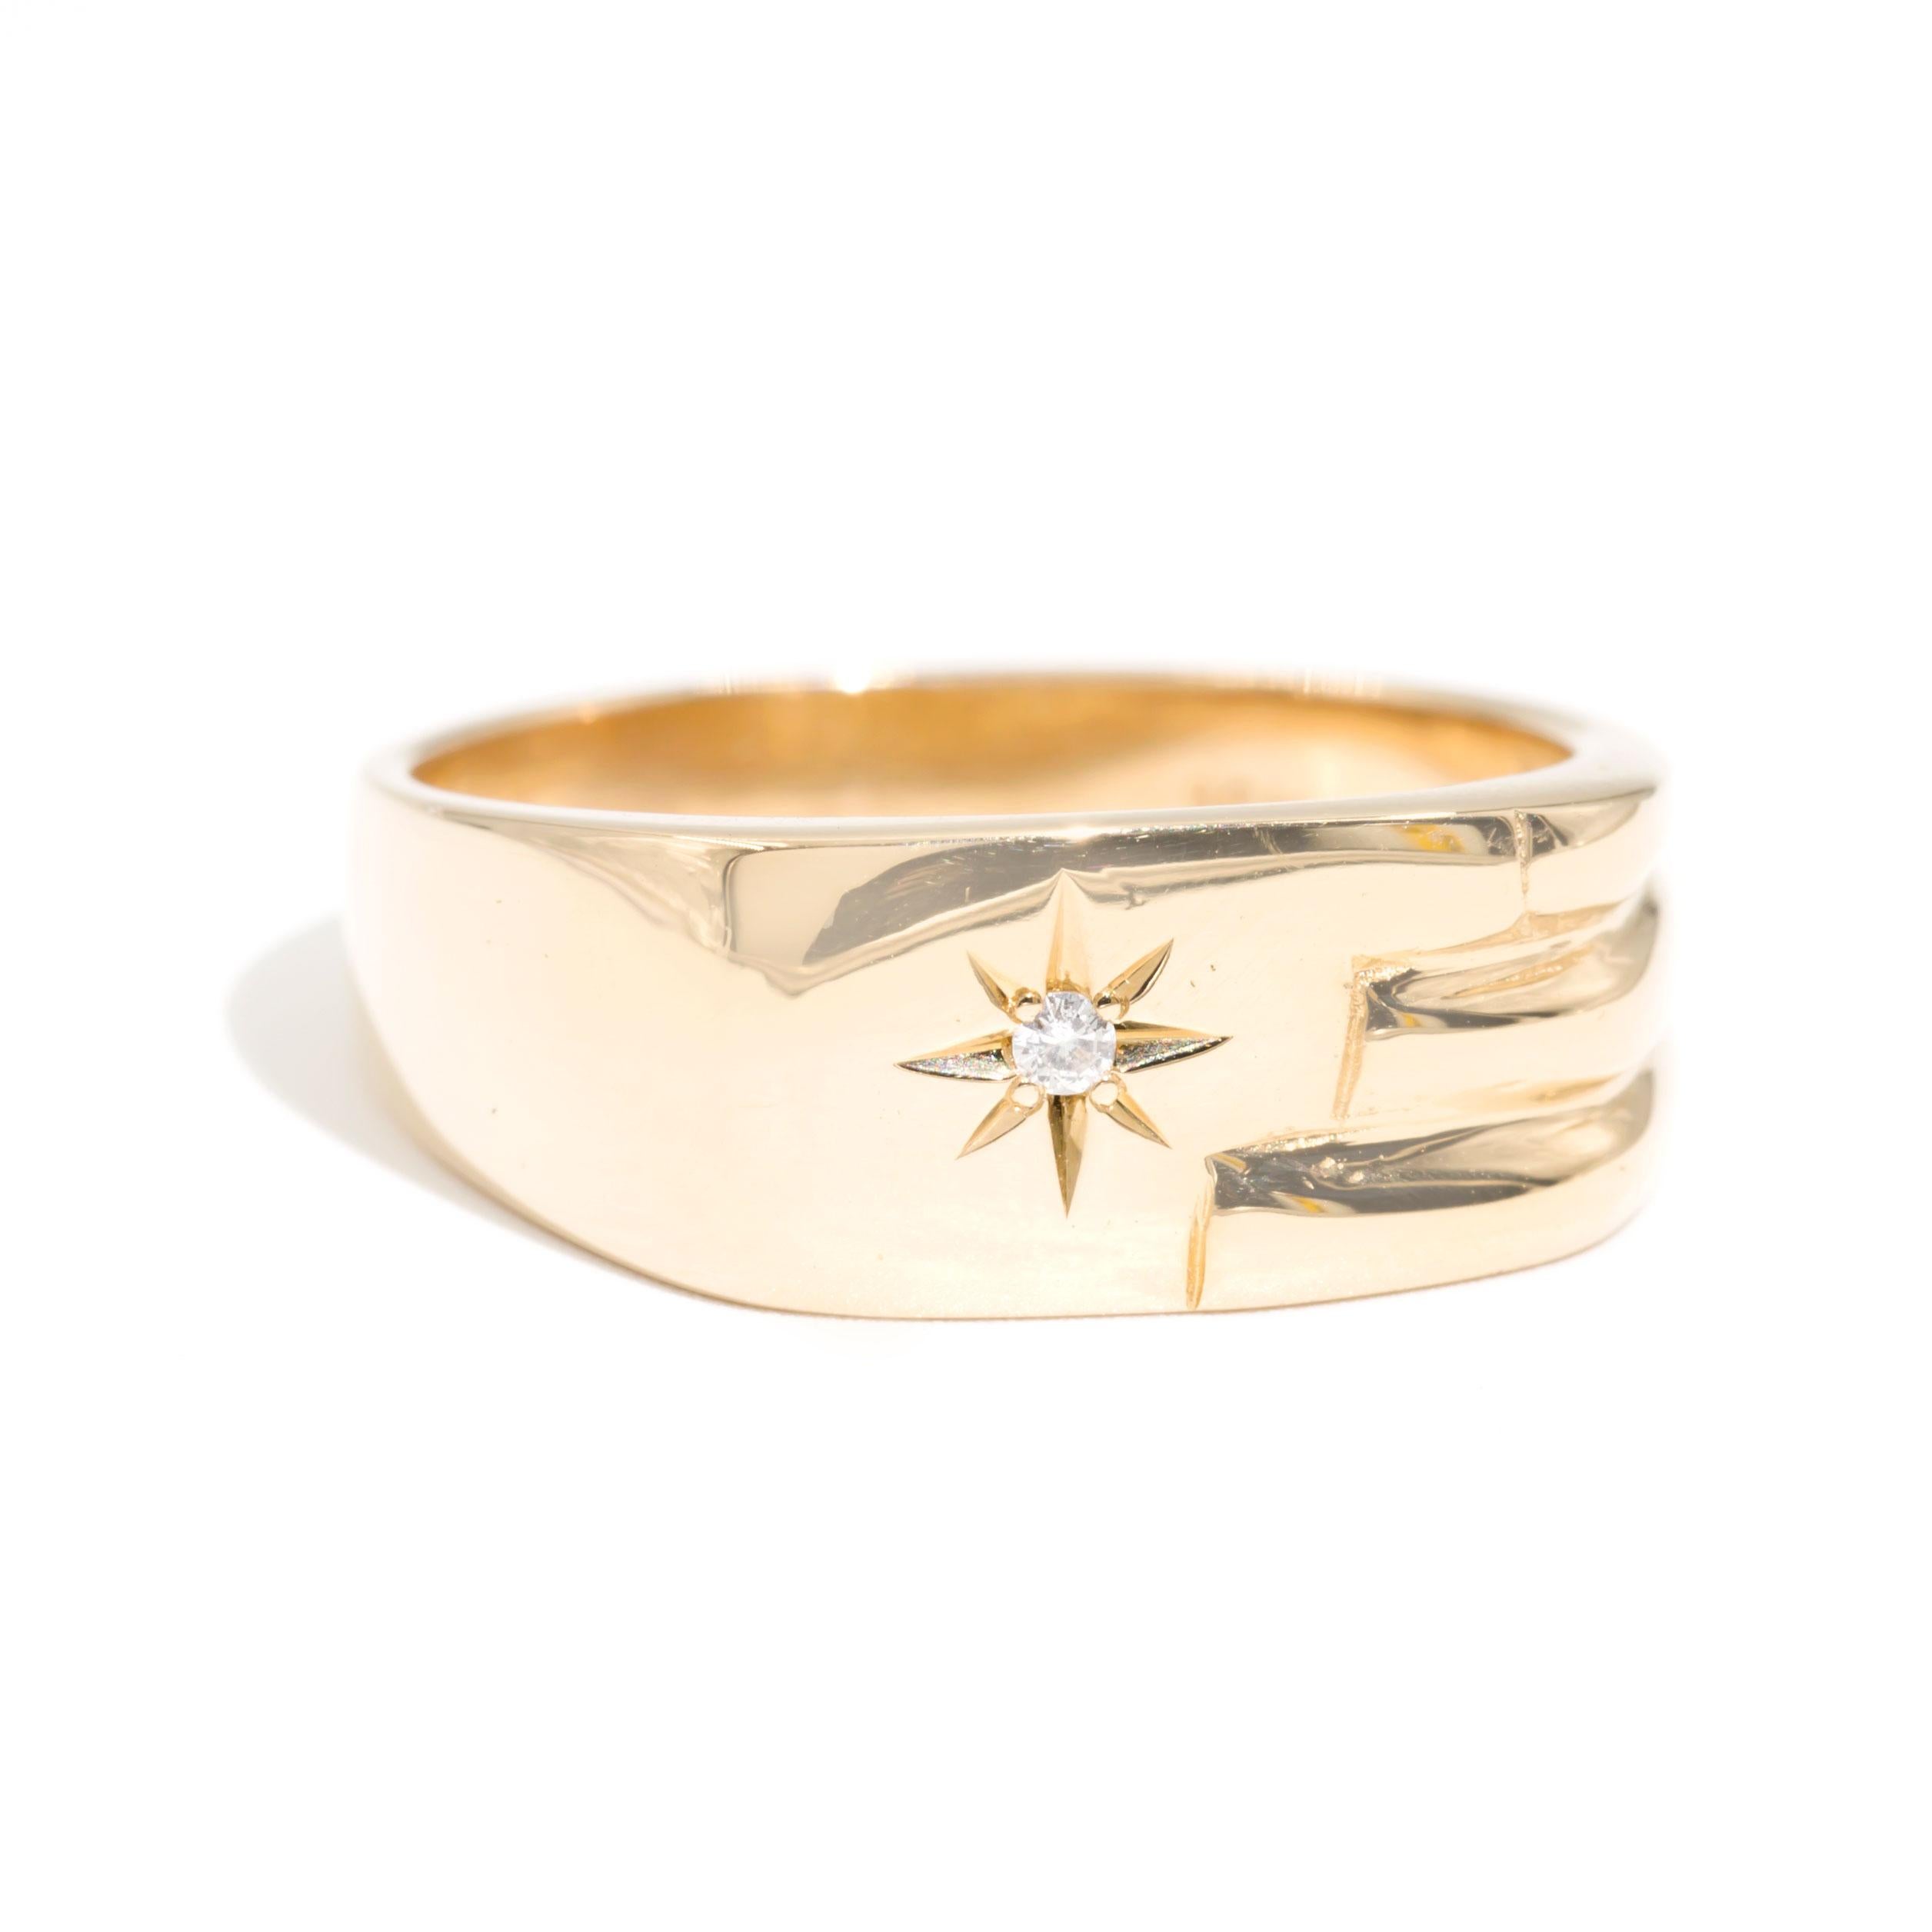 Forged in 18 carat yellow gold is this handsome mens signet ring featuring a star set round brilliant diamond and smooth curved lines flowing down one side.  We have named this dapper vintage ring The Devon Signet Ring.  The Devon Signet Ring is